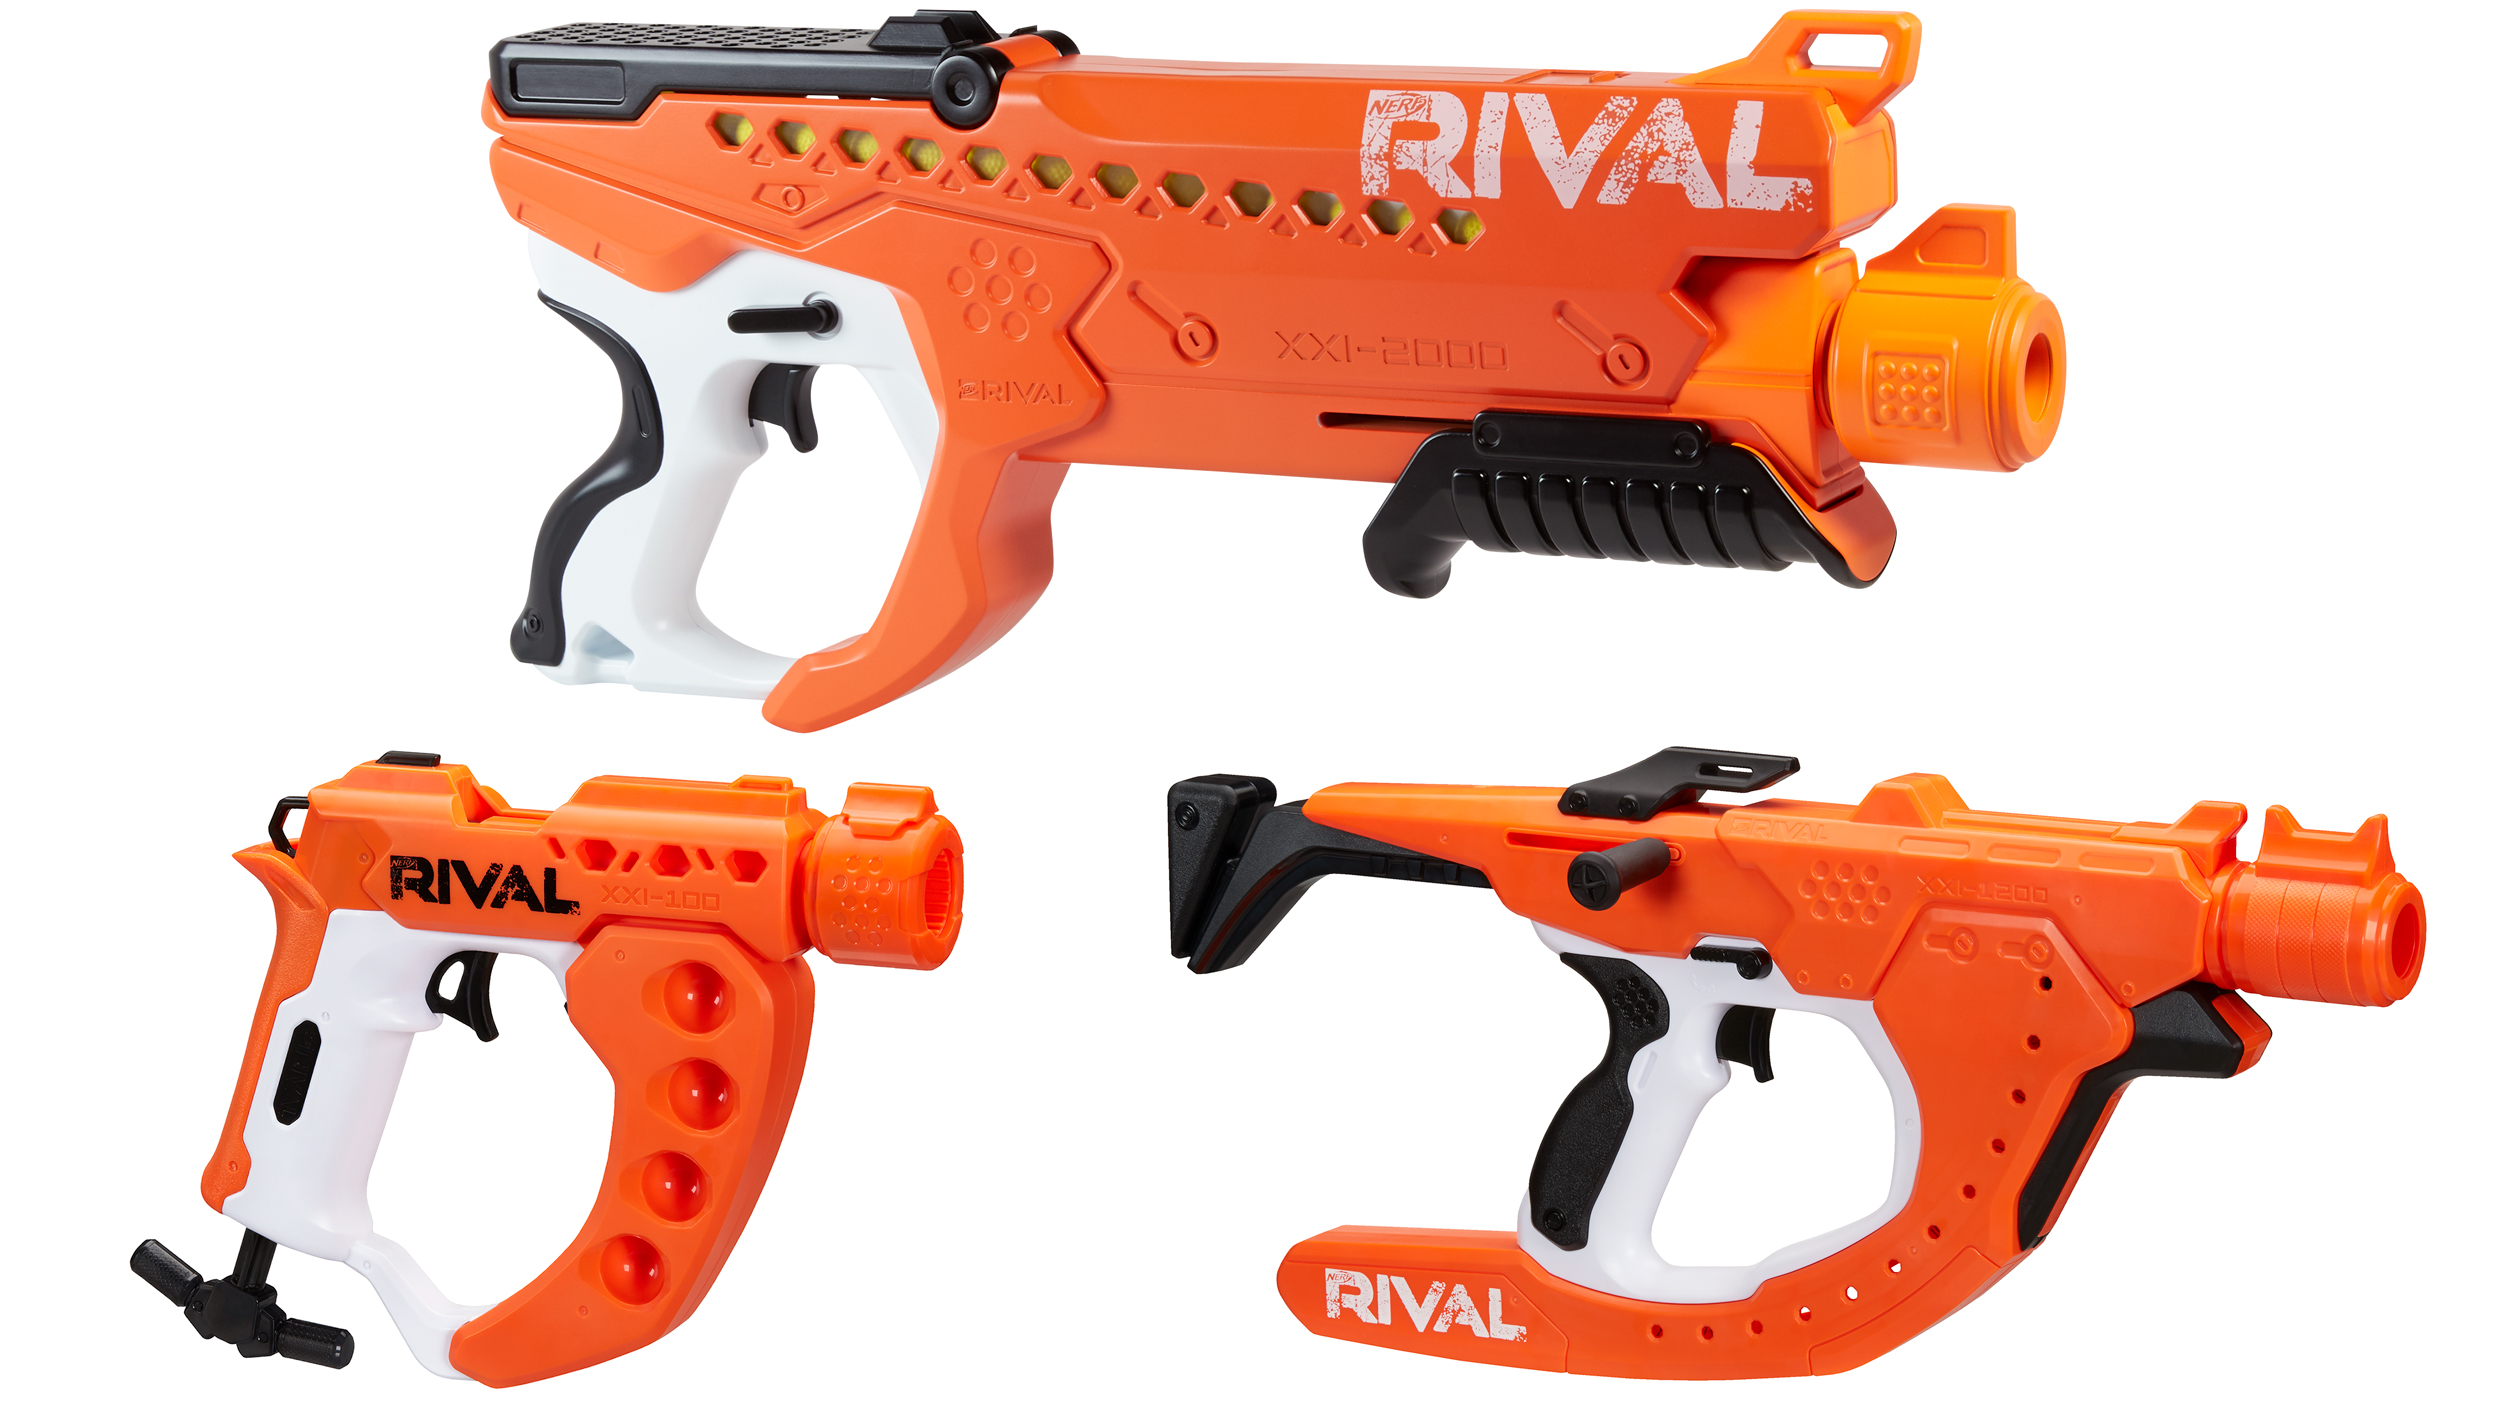 The Nerf Rival Curve Shot Helix XXI-2000 (top) will be available in August at Target, while the Rival Curve Shot Flex XXI-100 (bottom, left) and Rival Curve Shot Sideswipe XXI-1200 (bottom, right) will be available at most toy retailers starting in March. (Image: Hasbro Nerf)